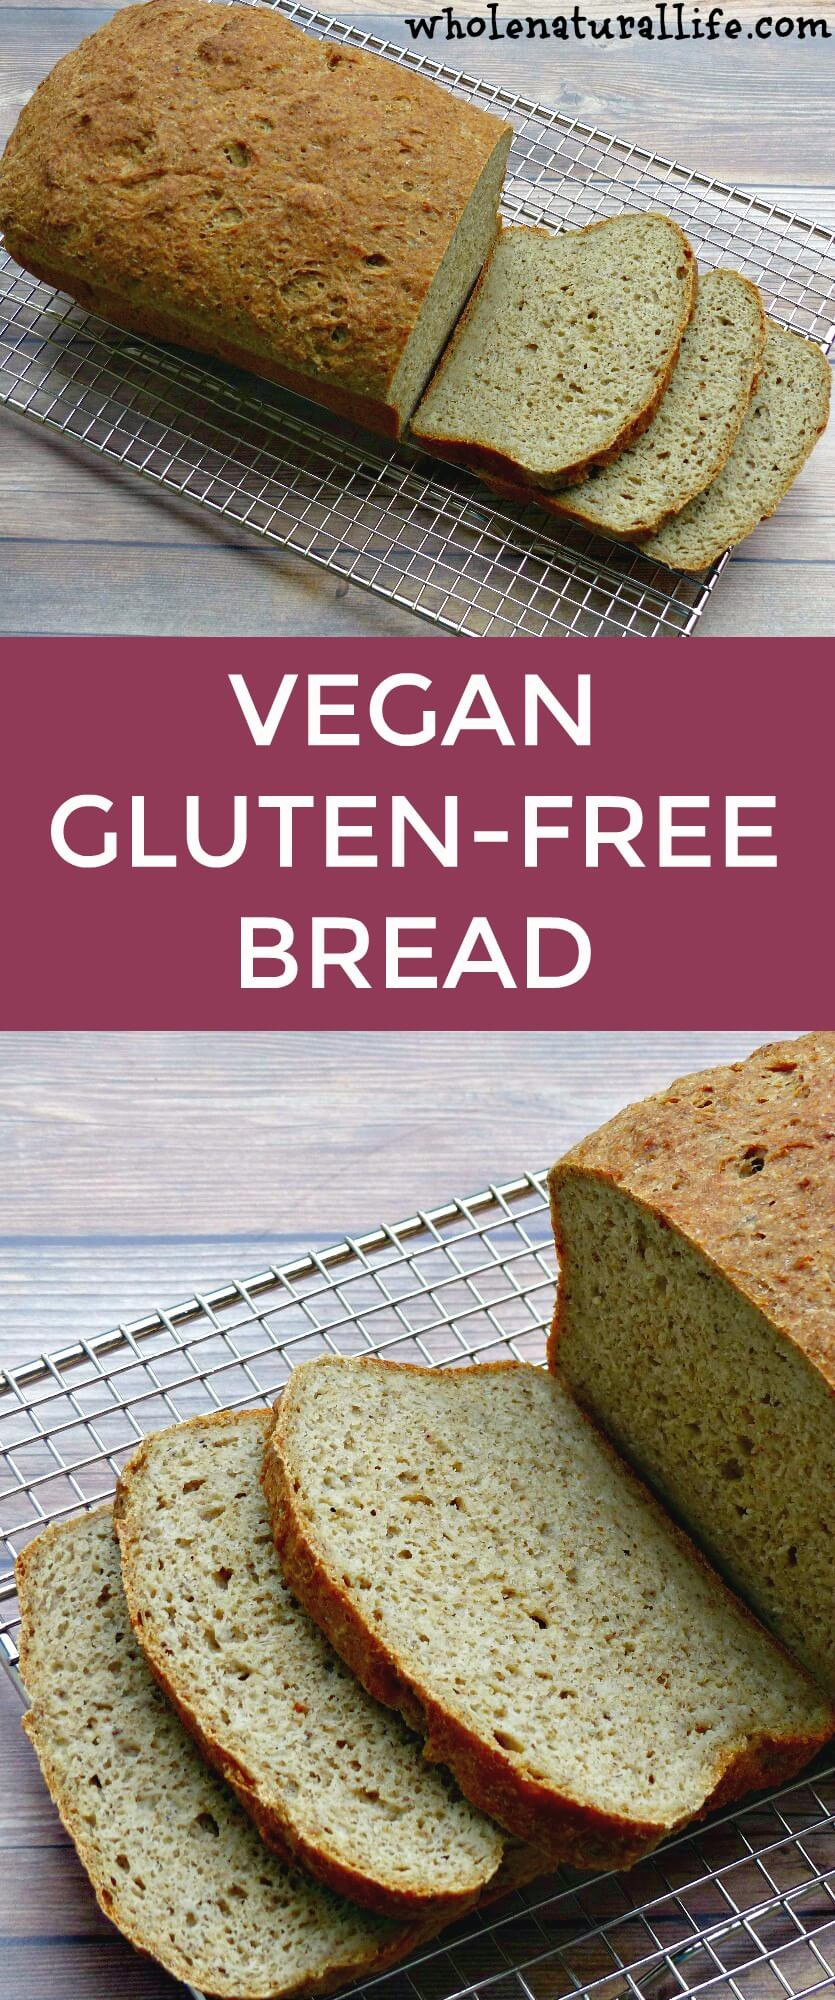 Gluten Free and Dairy Free Bread Luxury Vegan Gluten Free Bread whole Natural Life